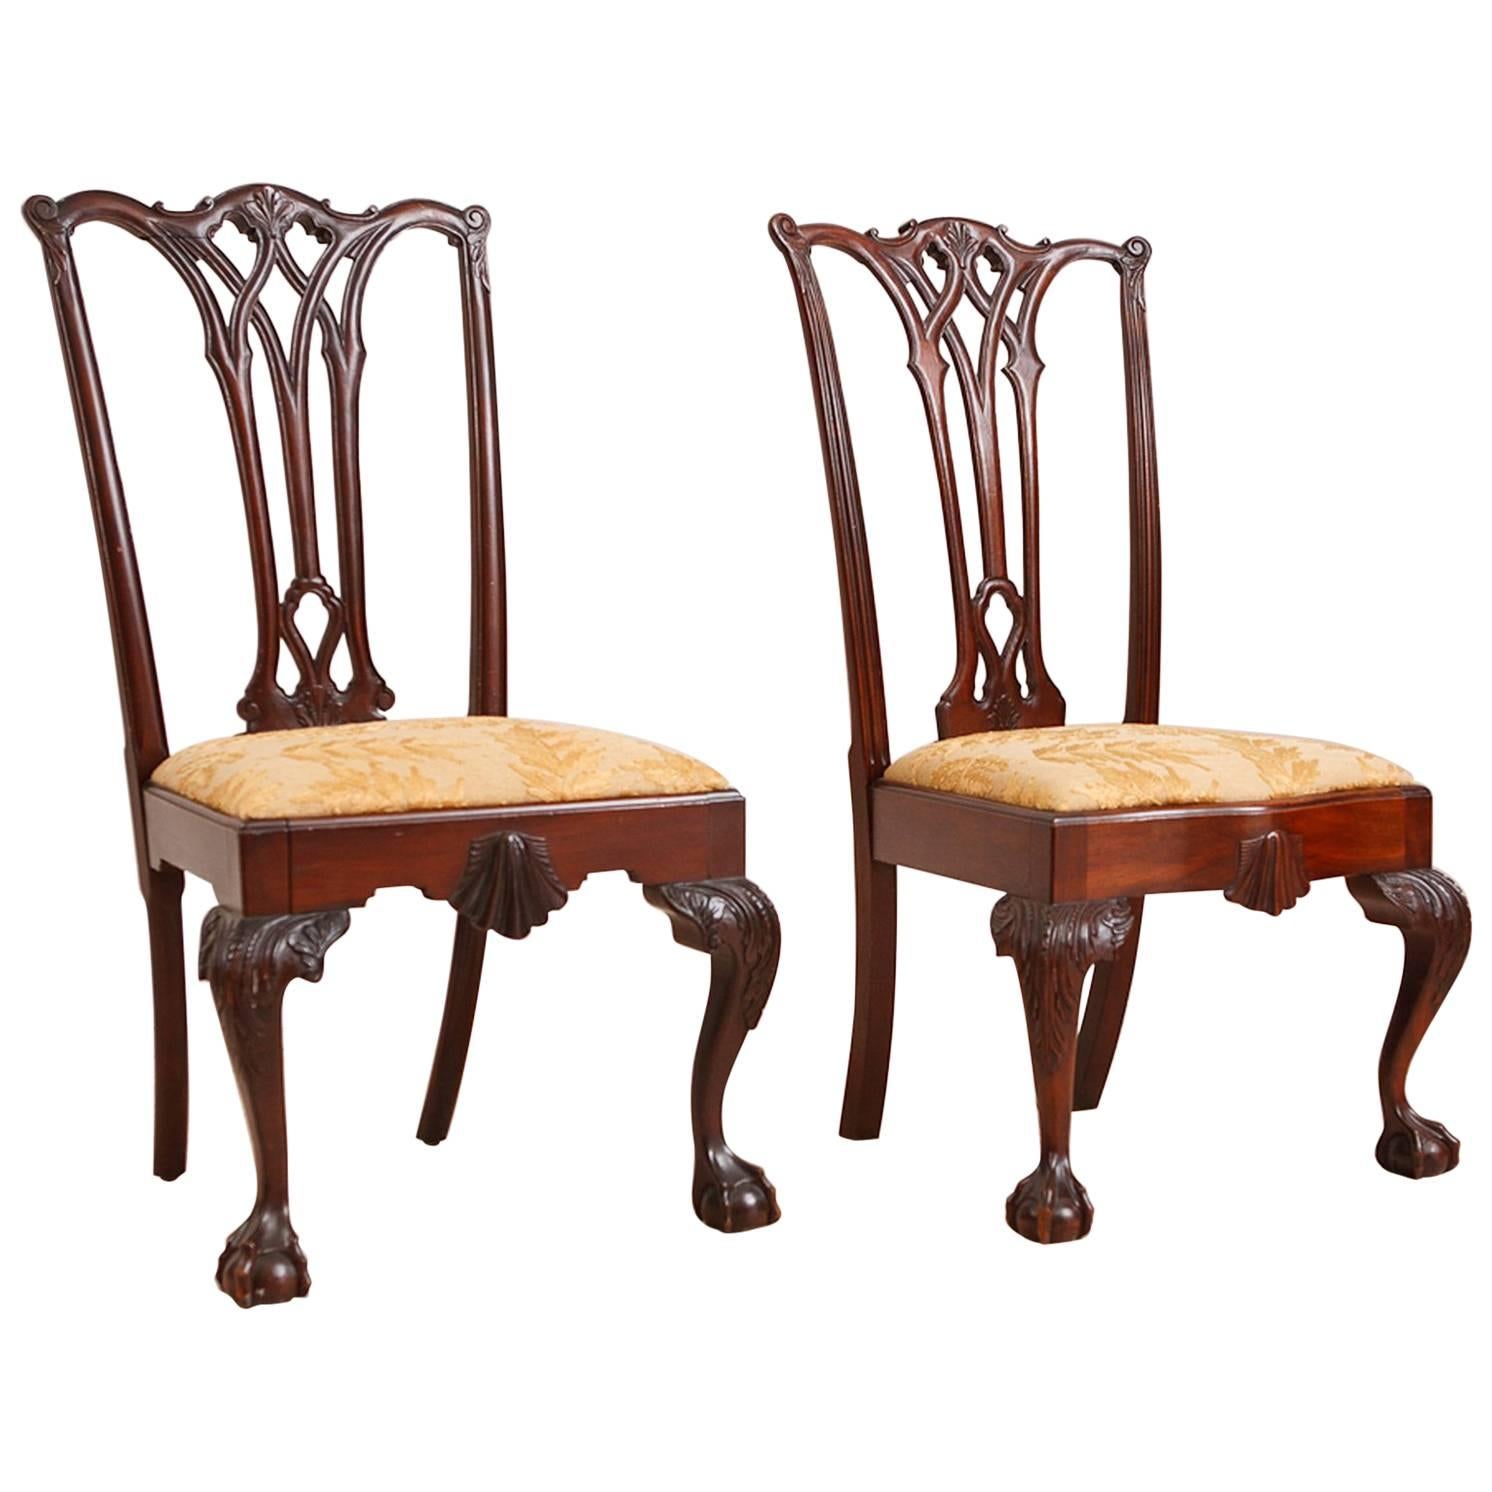 2 Centennial Philadelphia Chippendale-Style Chairs in Mahogany, circa 1870 For Sale